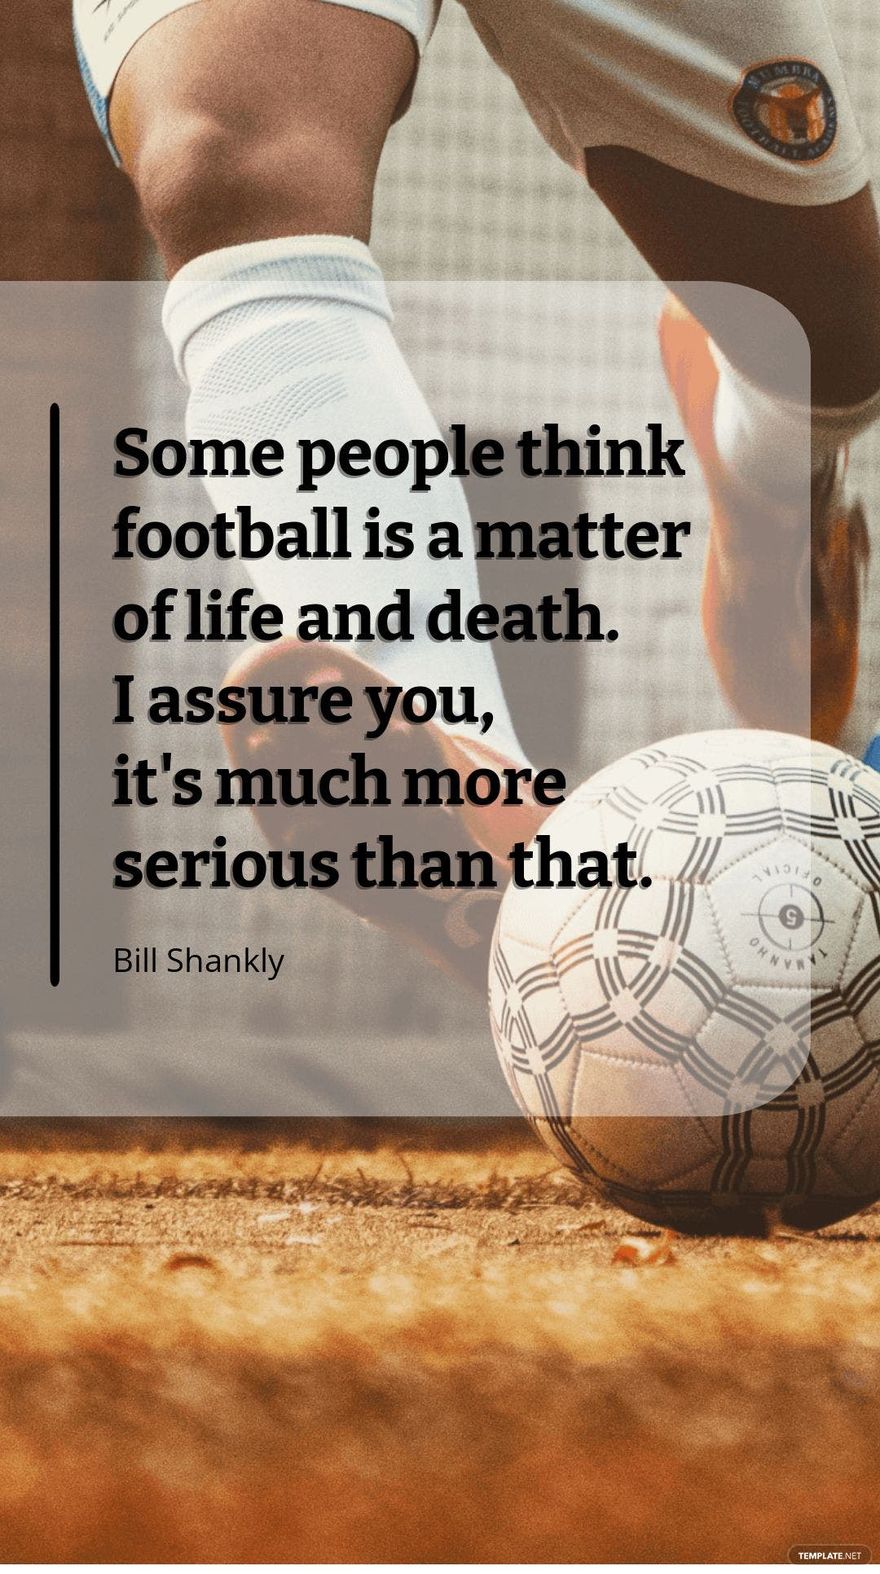 Bill Shankly - Some people think football is a matter of life and death. I assure you, it's much more serious than that.